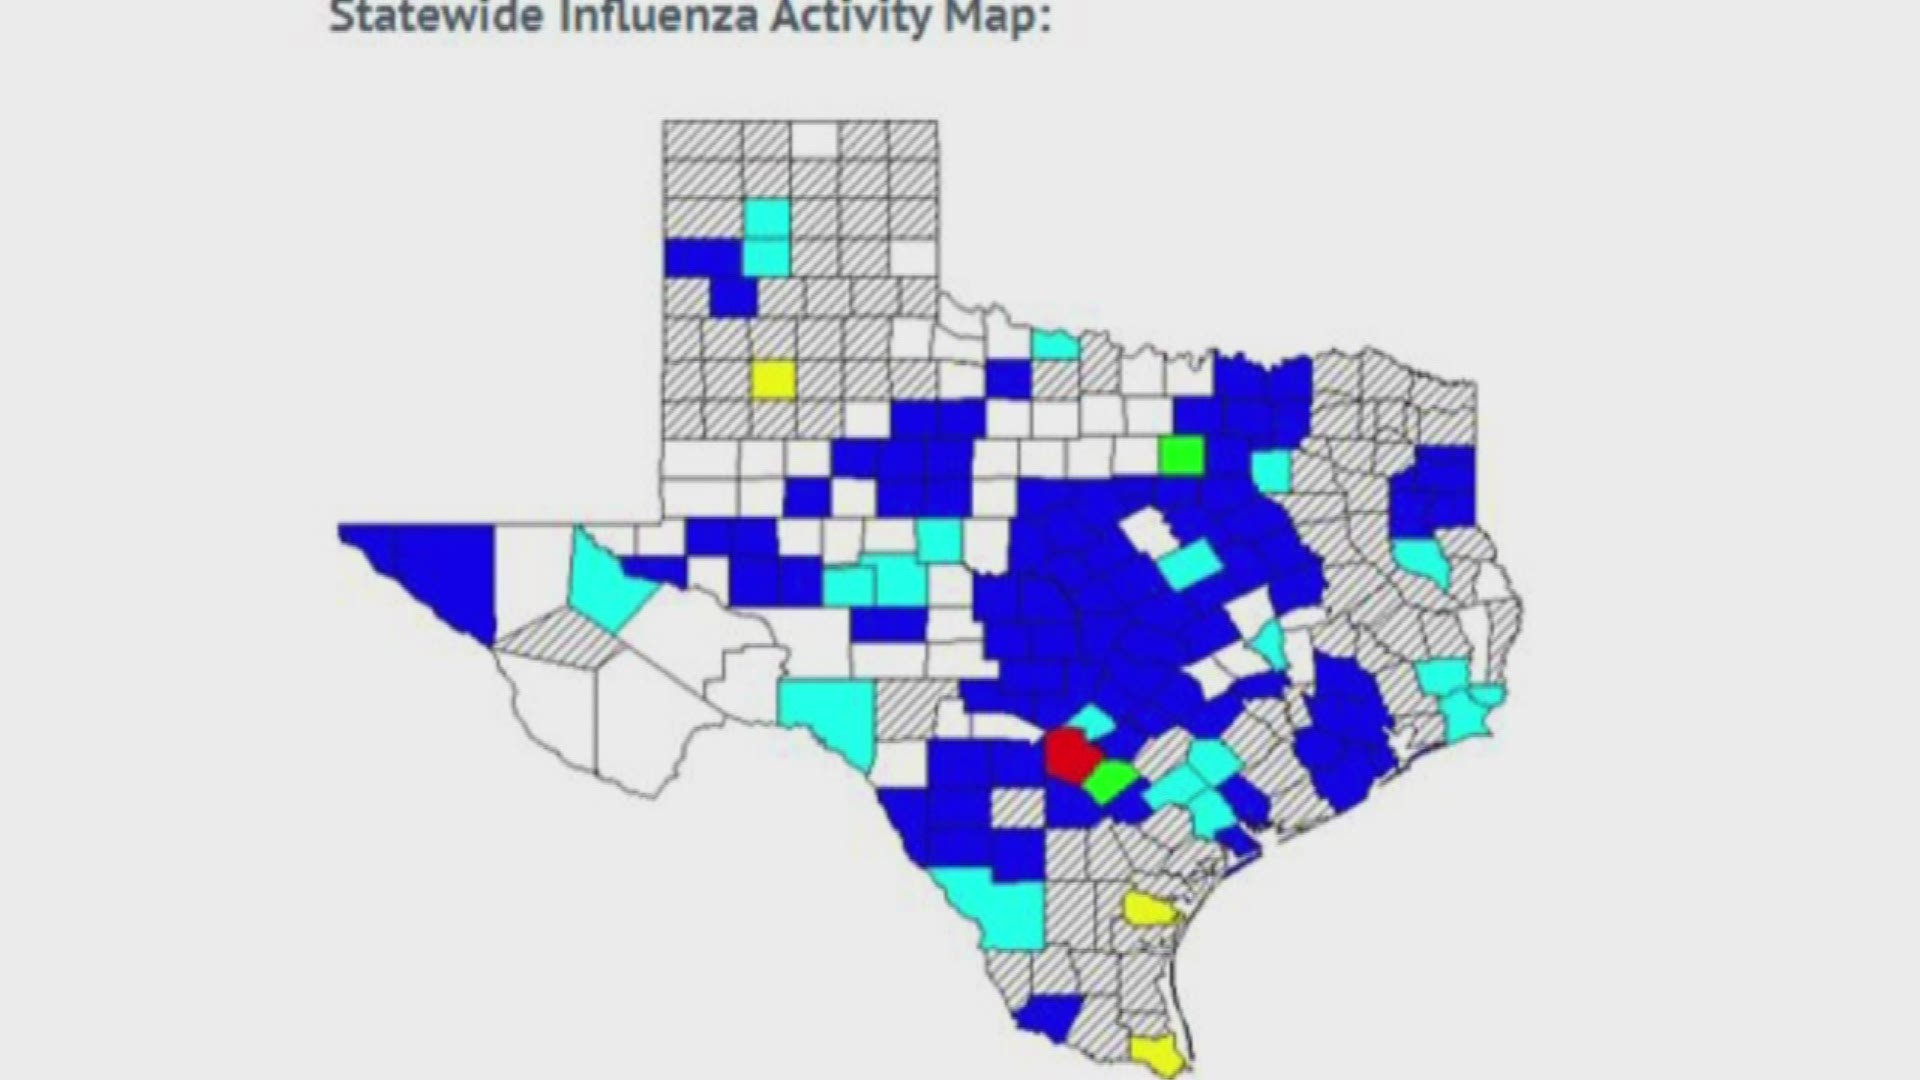 State officials said they're seeing an increased number of flu cases on a weekly basis.